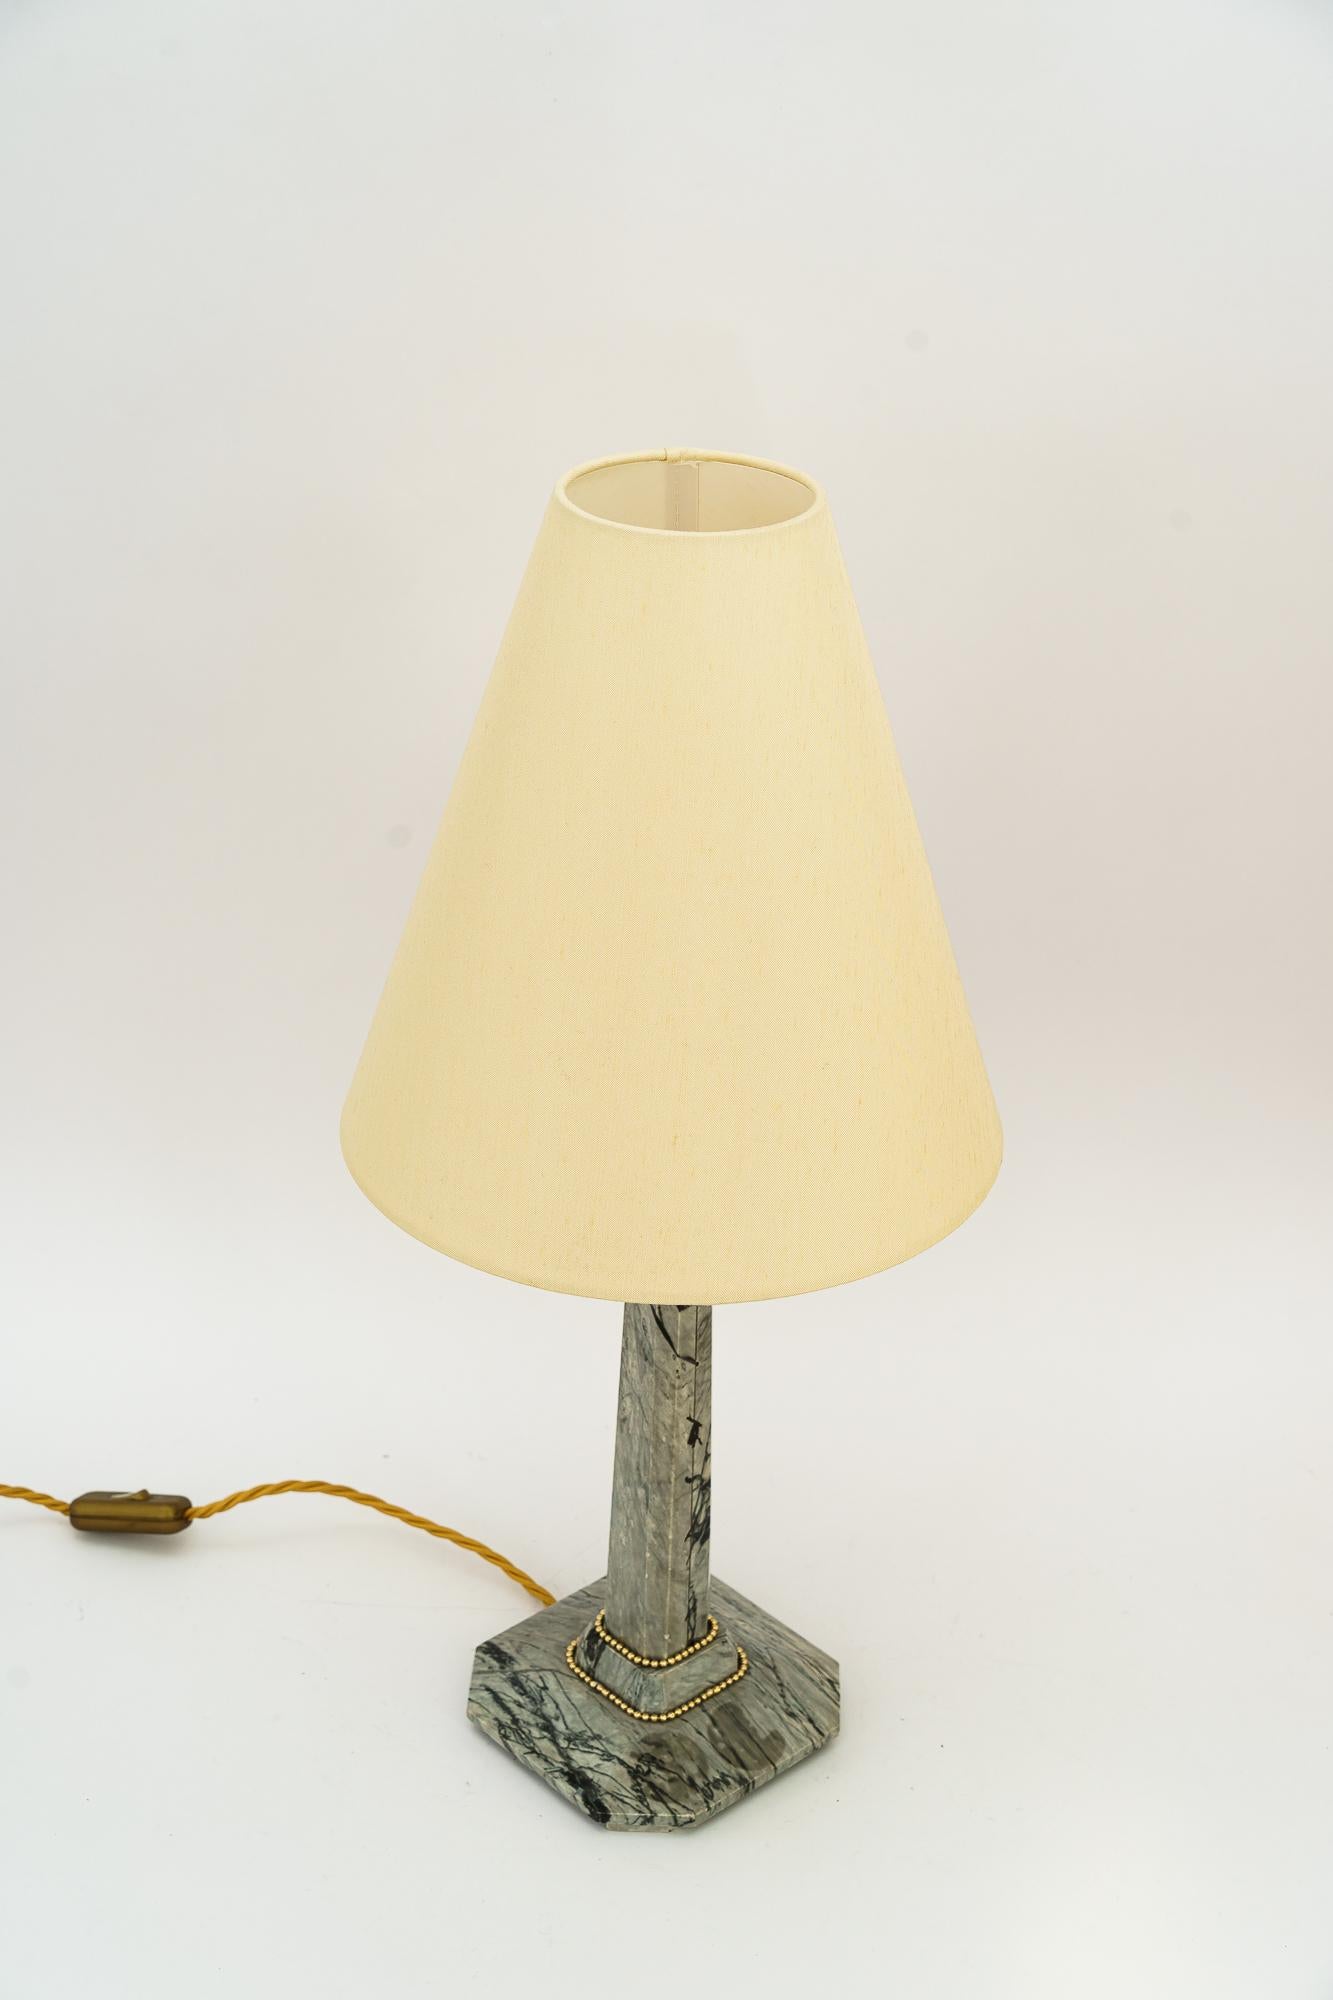 Art Deco Marble Table lamp with brass parts and fabric shade vienna around 1920s
Brass parts polished and stove enameled
The fabric shade is replaced ( new )